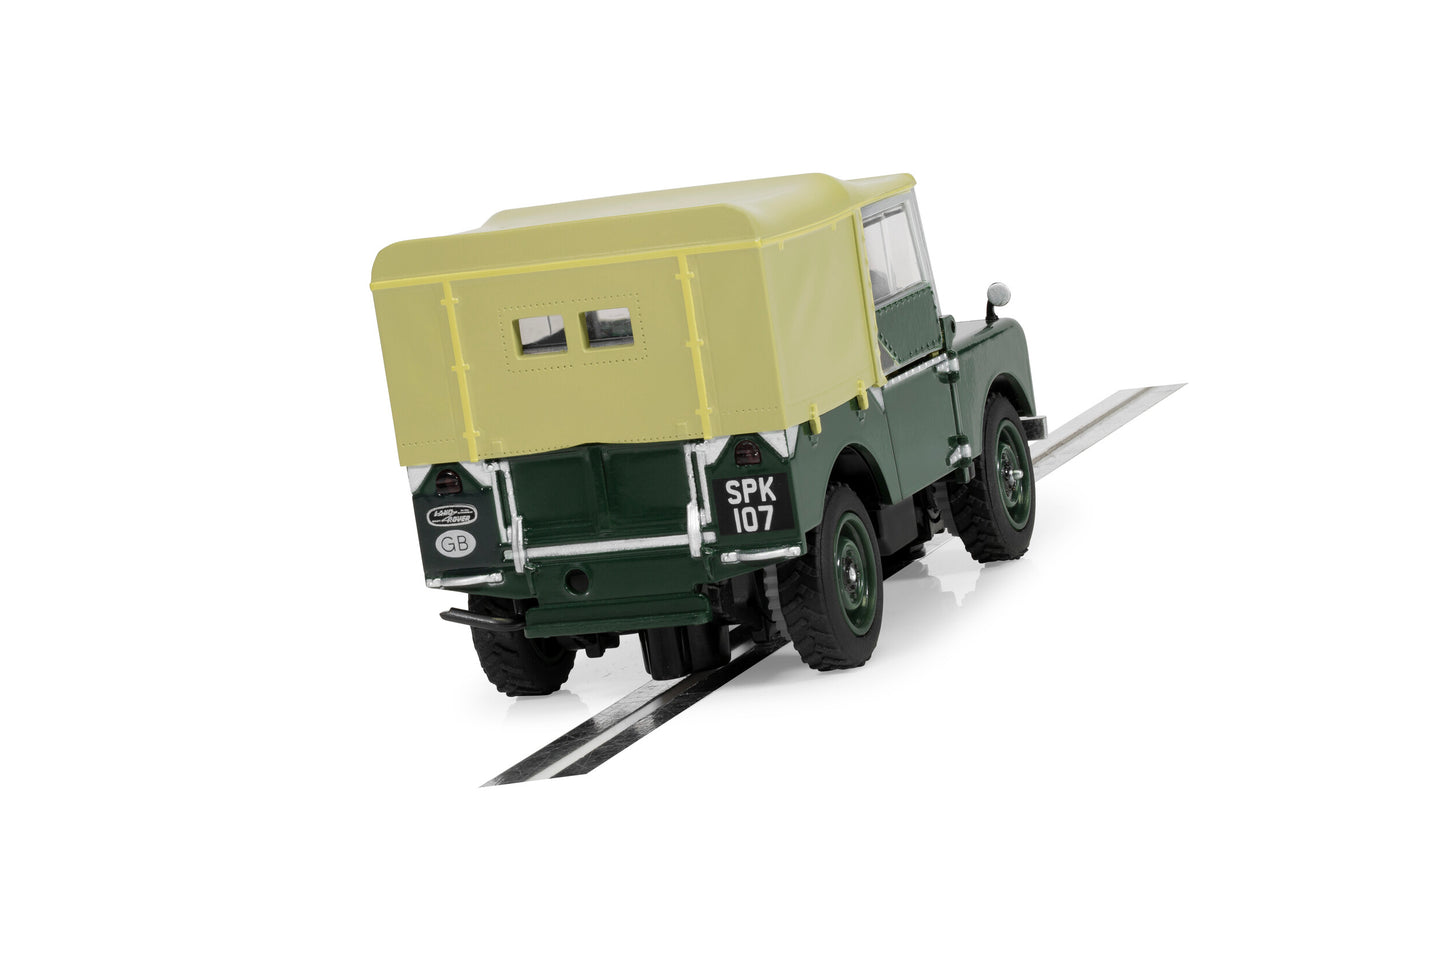 Scalextric C4441 Land Rover Series 1 - Green - Chester Model Centre